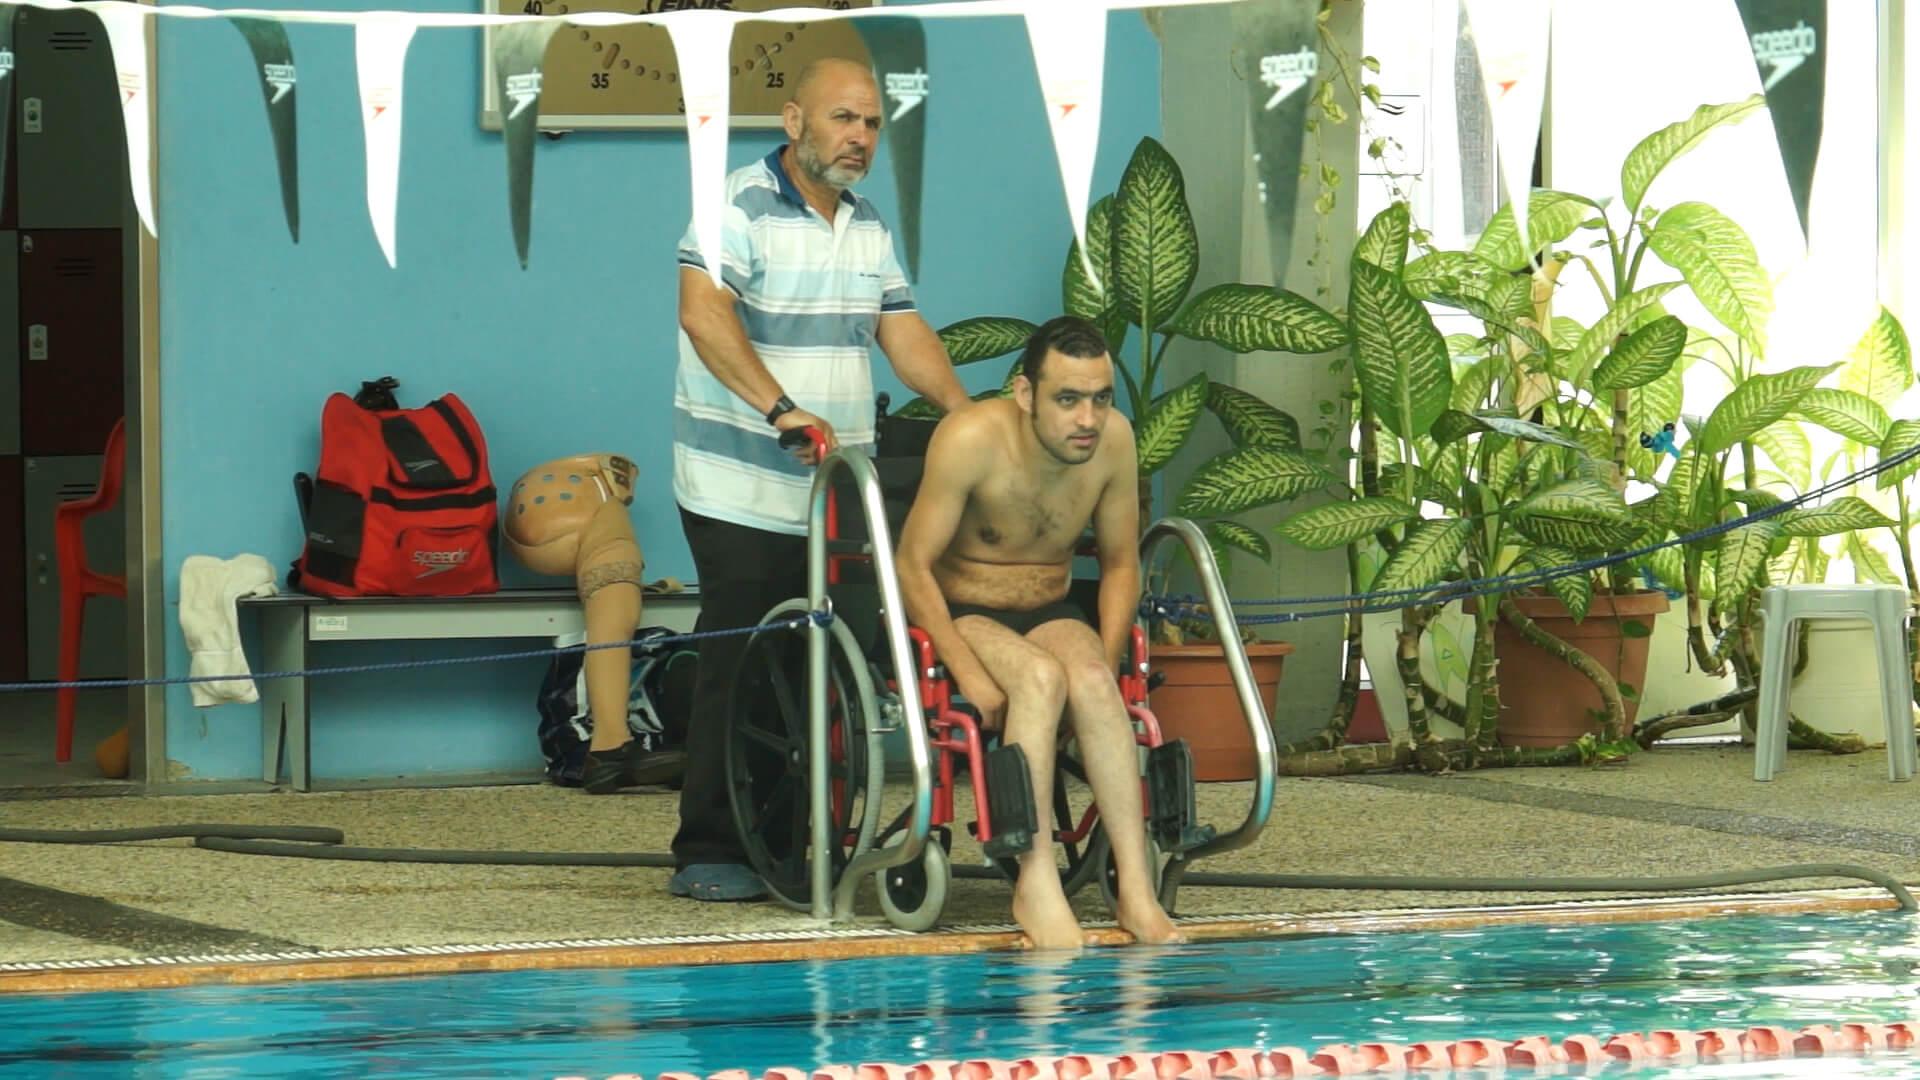 Iyad Shalabi and his father, Yusef, in the documentary “Swimming Against the Current” (Promotional still)